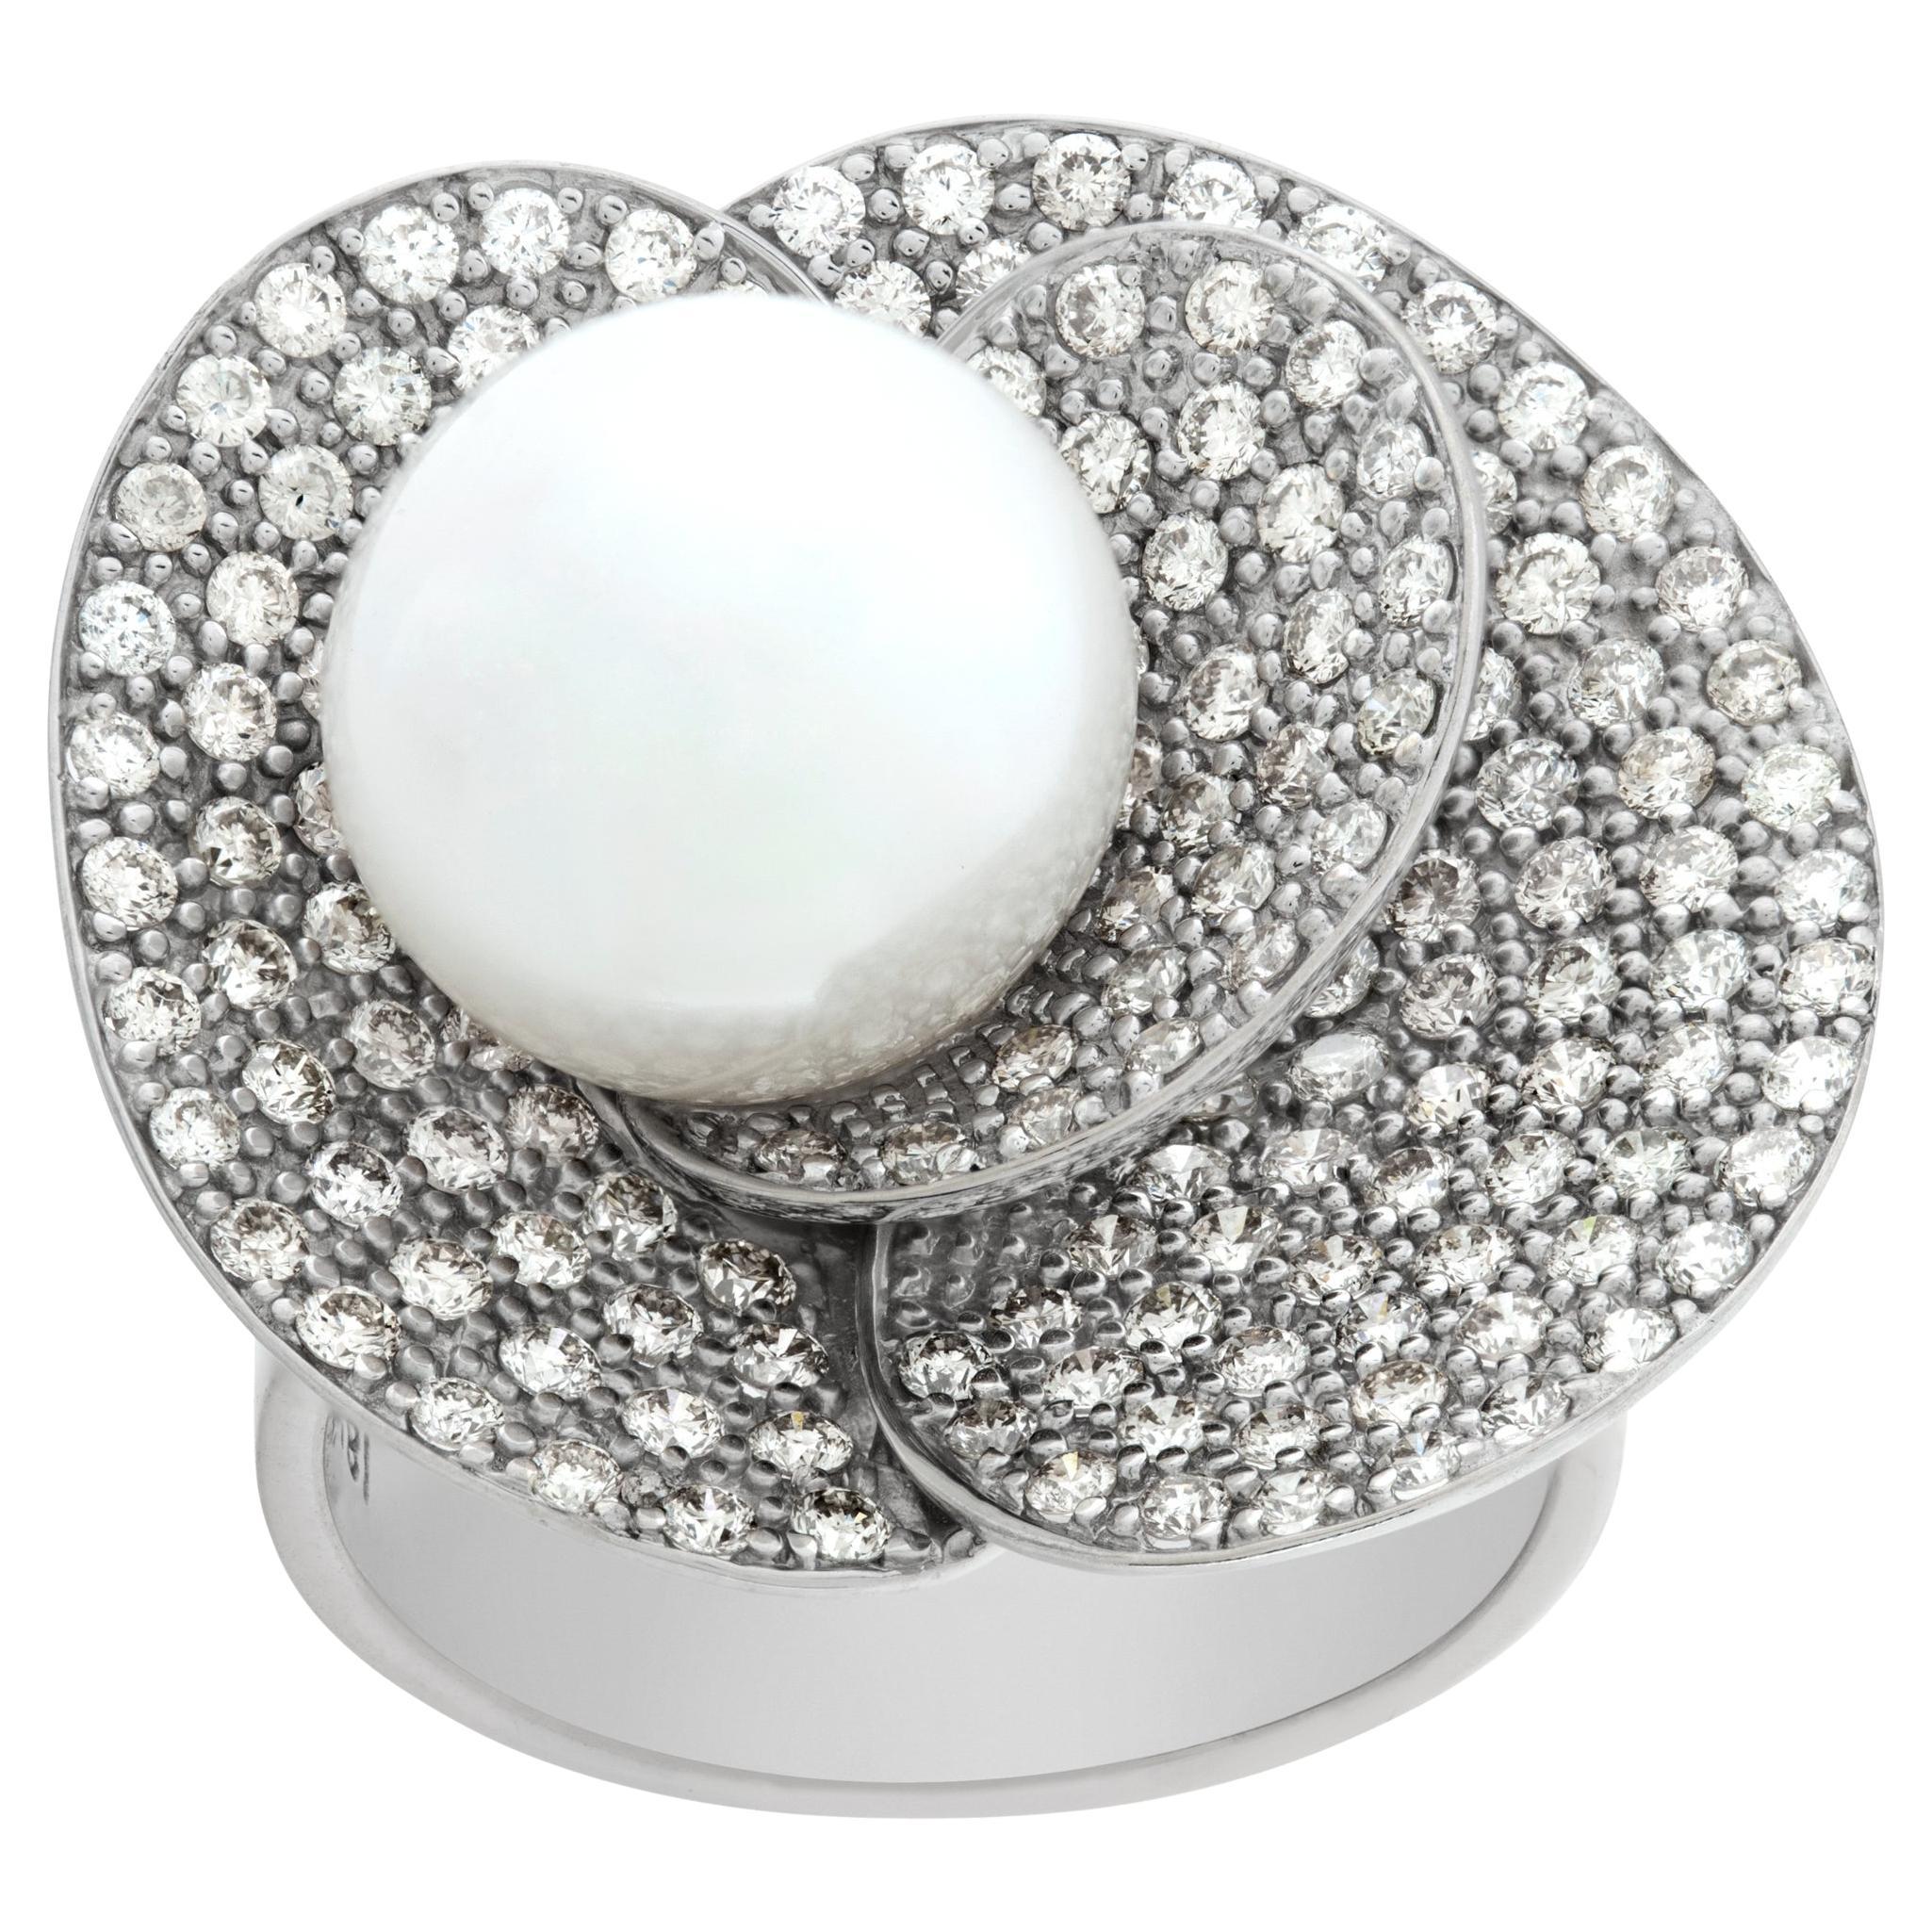 White gold pave diamond petals ring cradling a 11.3 mm cultured pearl For Sale